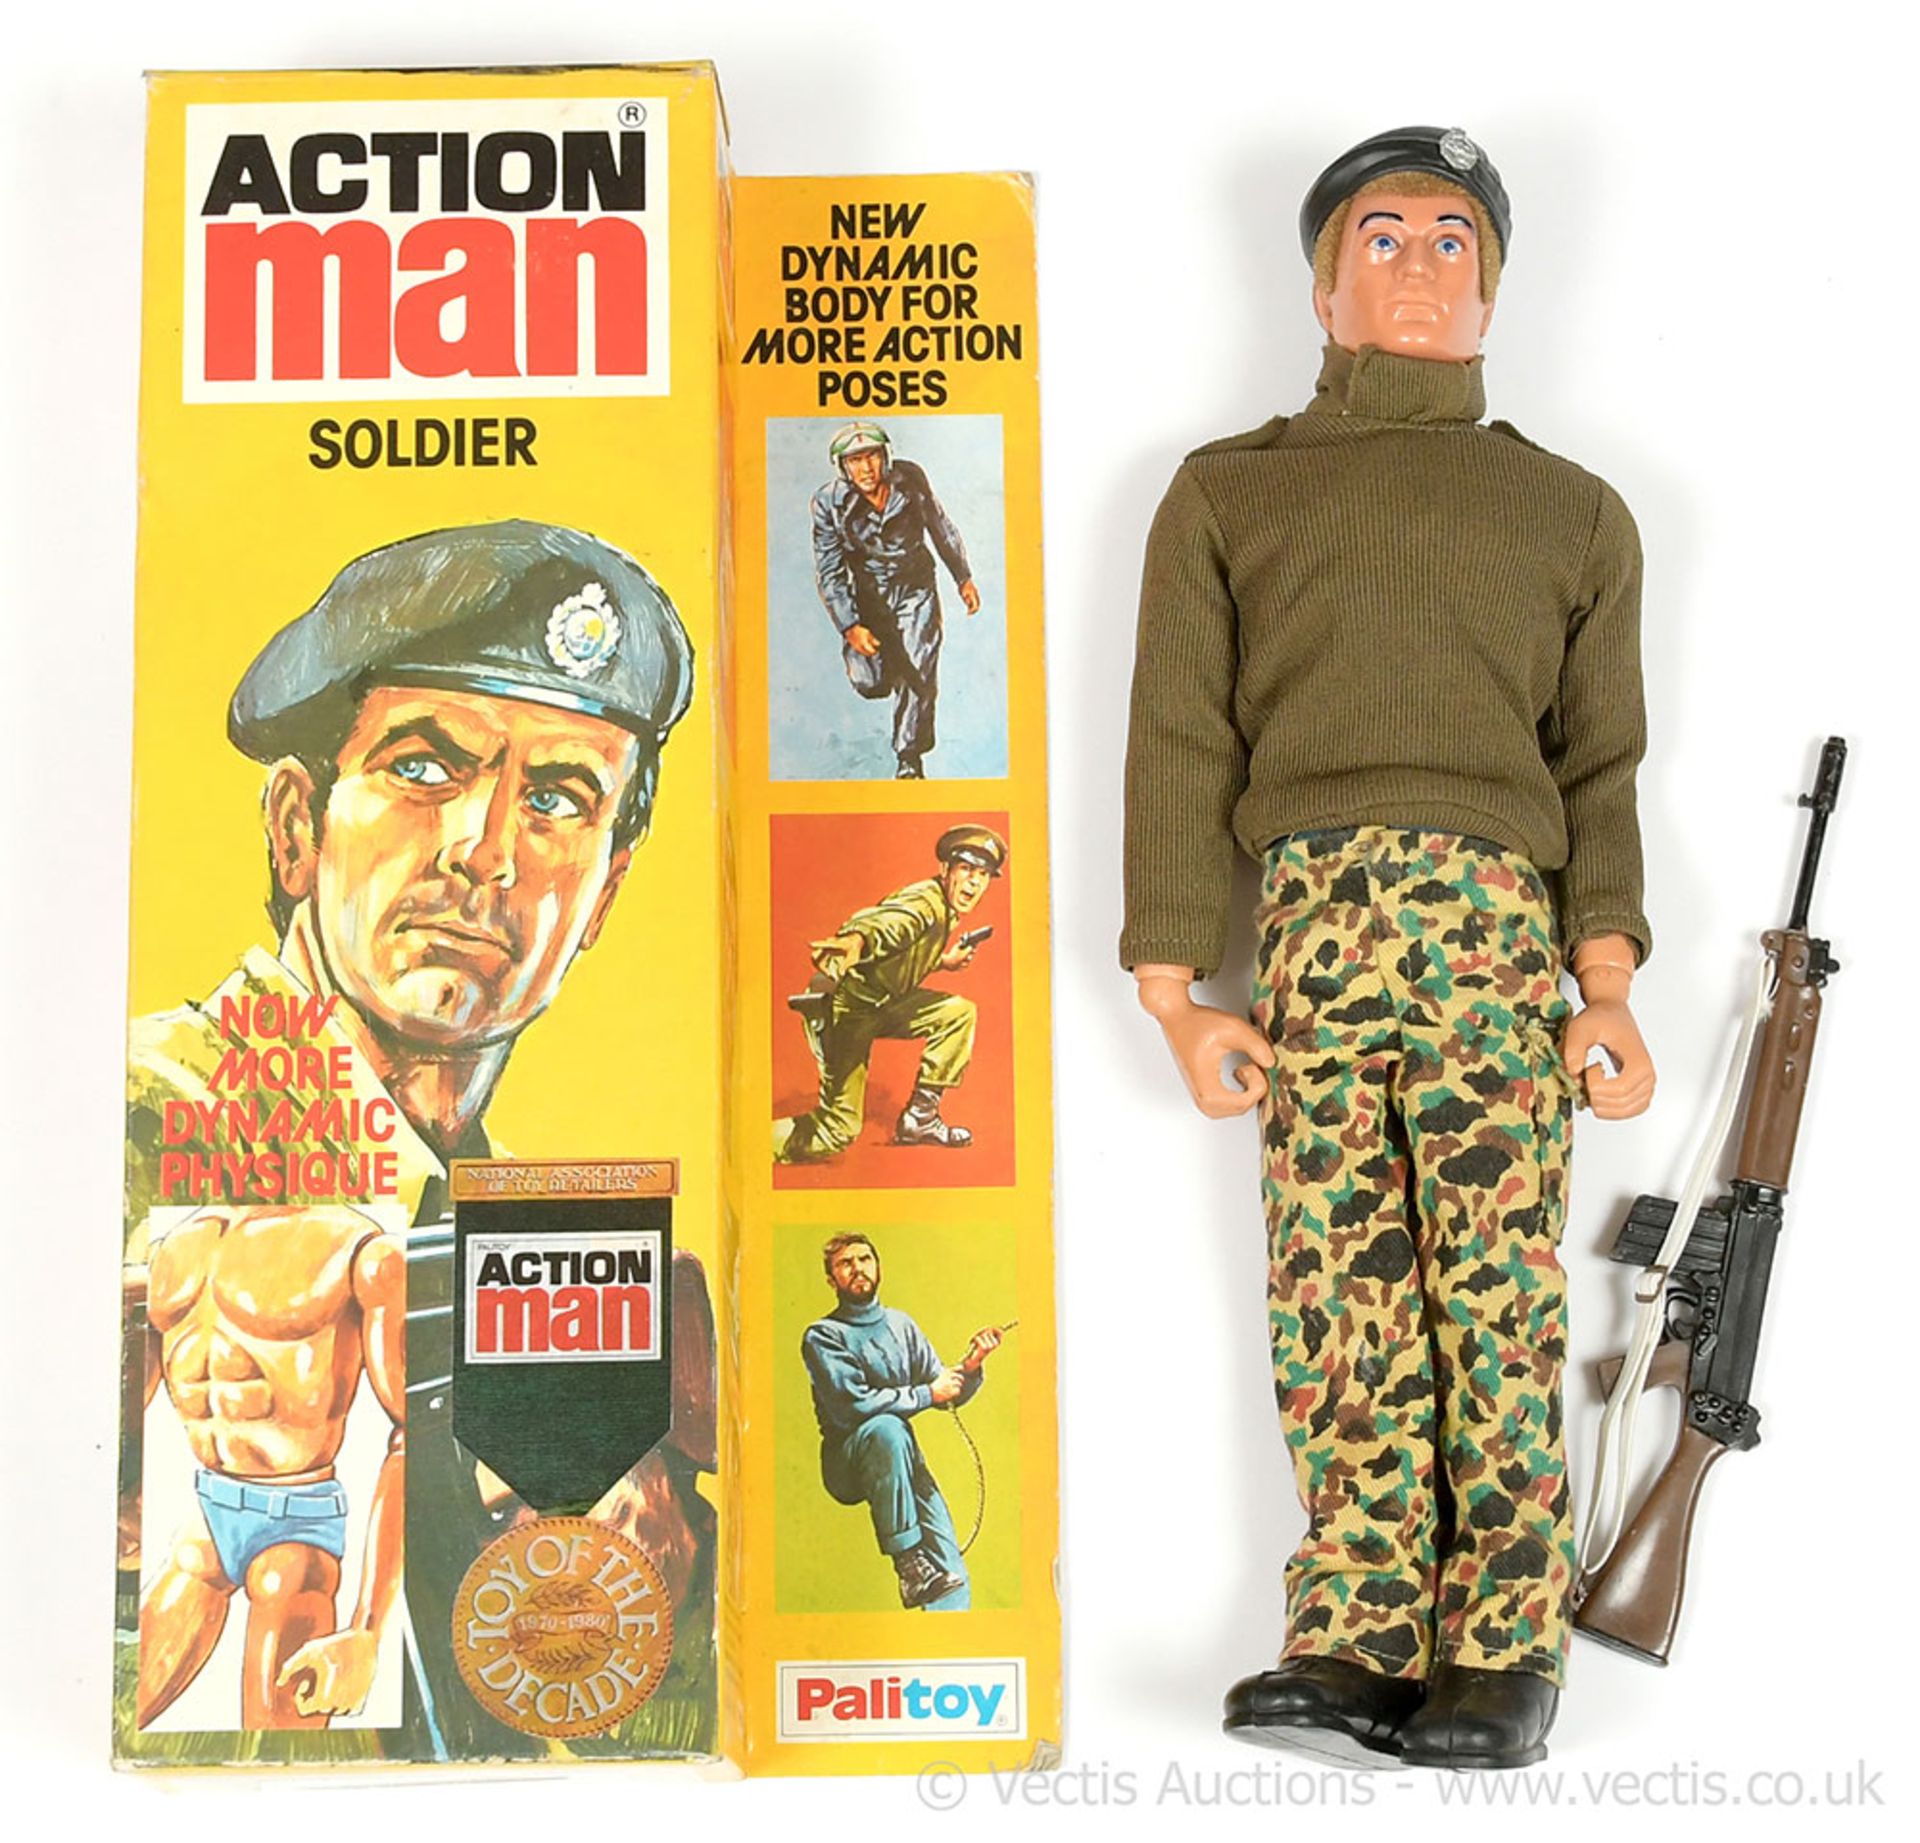 Palitoy Action Man Vintage Soldier - flock head